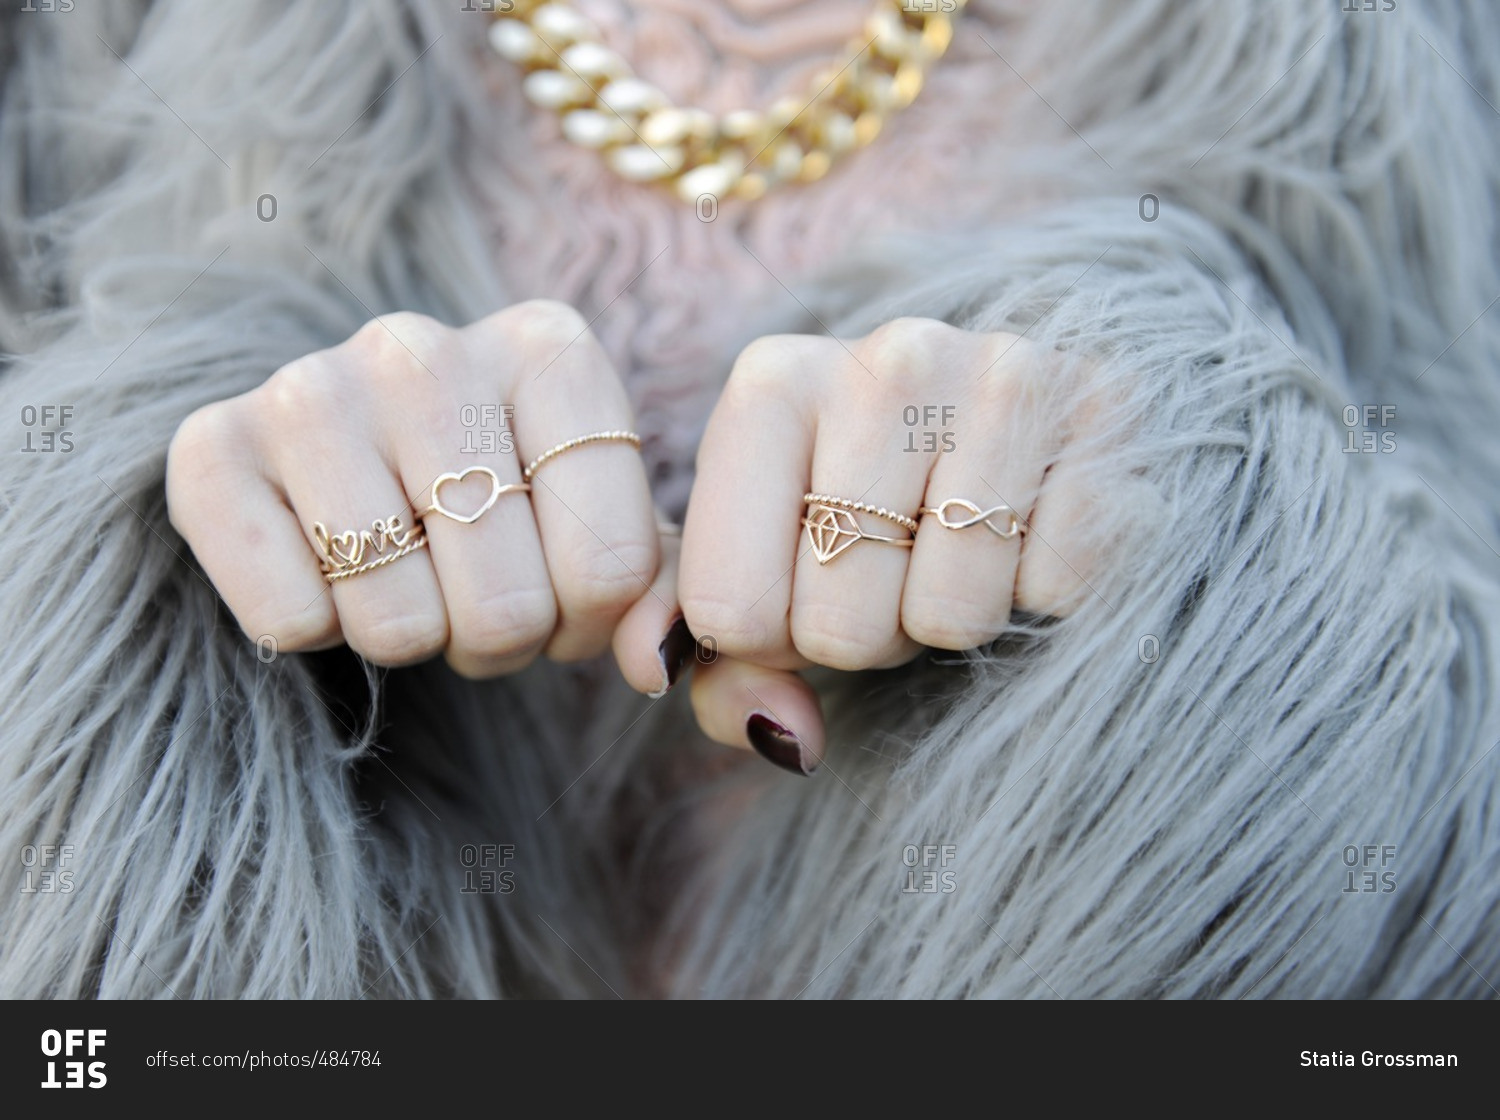 Woman in fur coat with lots of rings